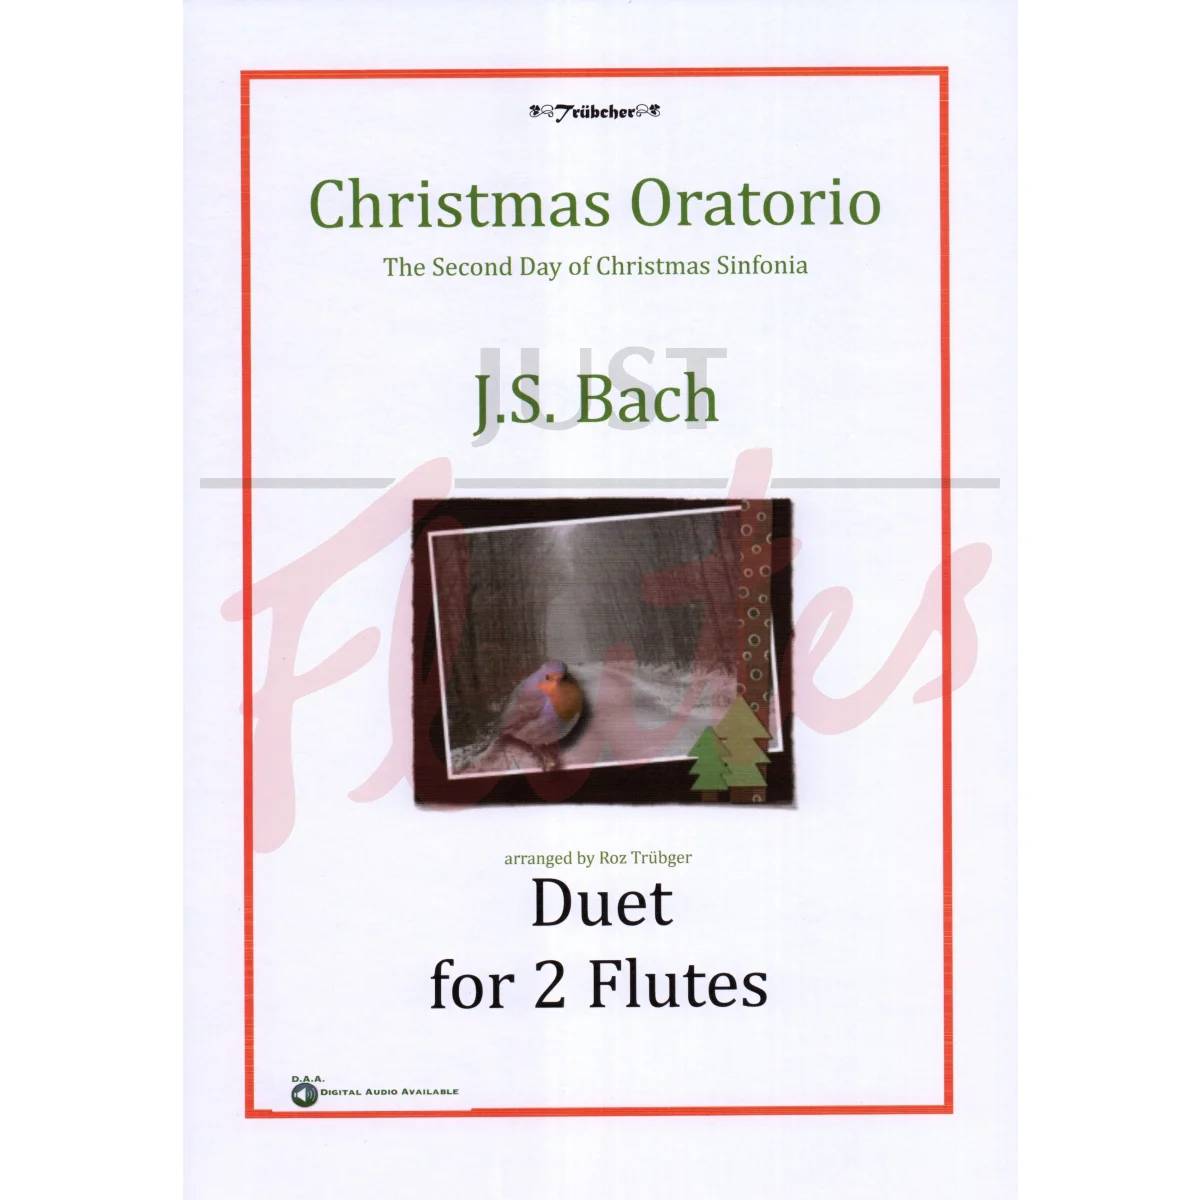 Christmas Oratorio - The Second Day of Christmas Sinfonia for Two Flutes